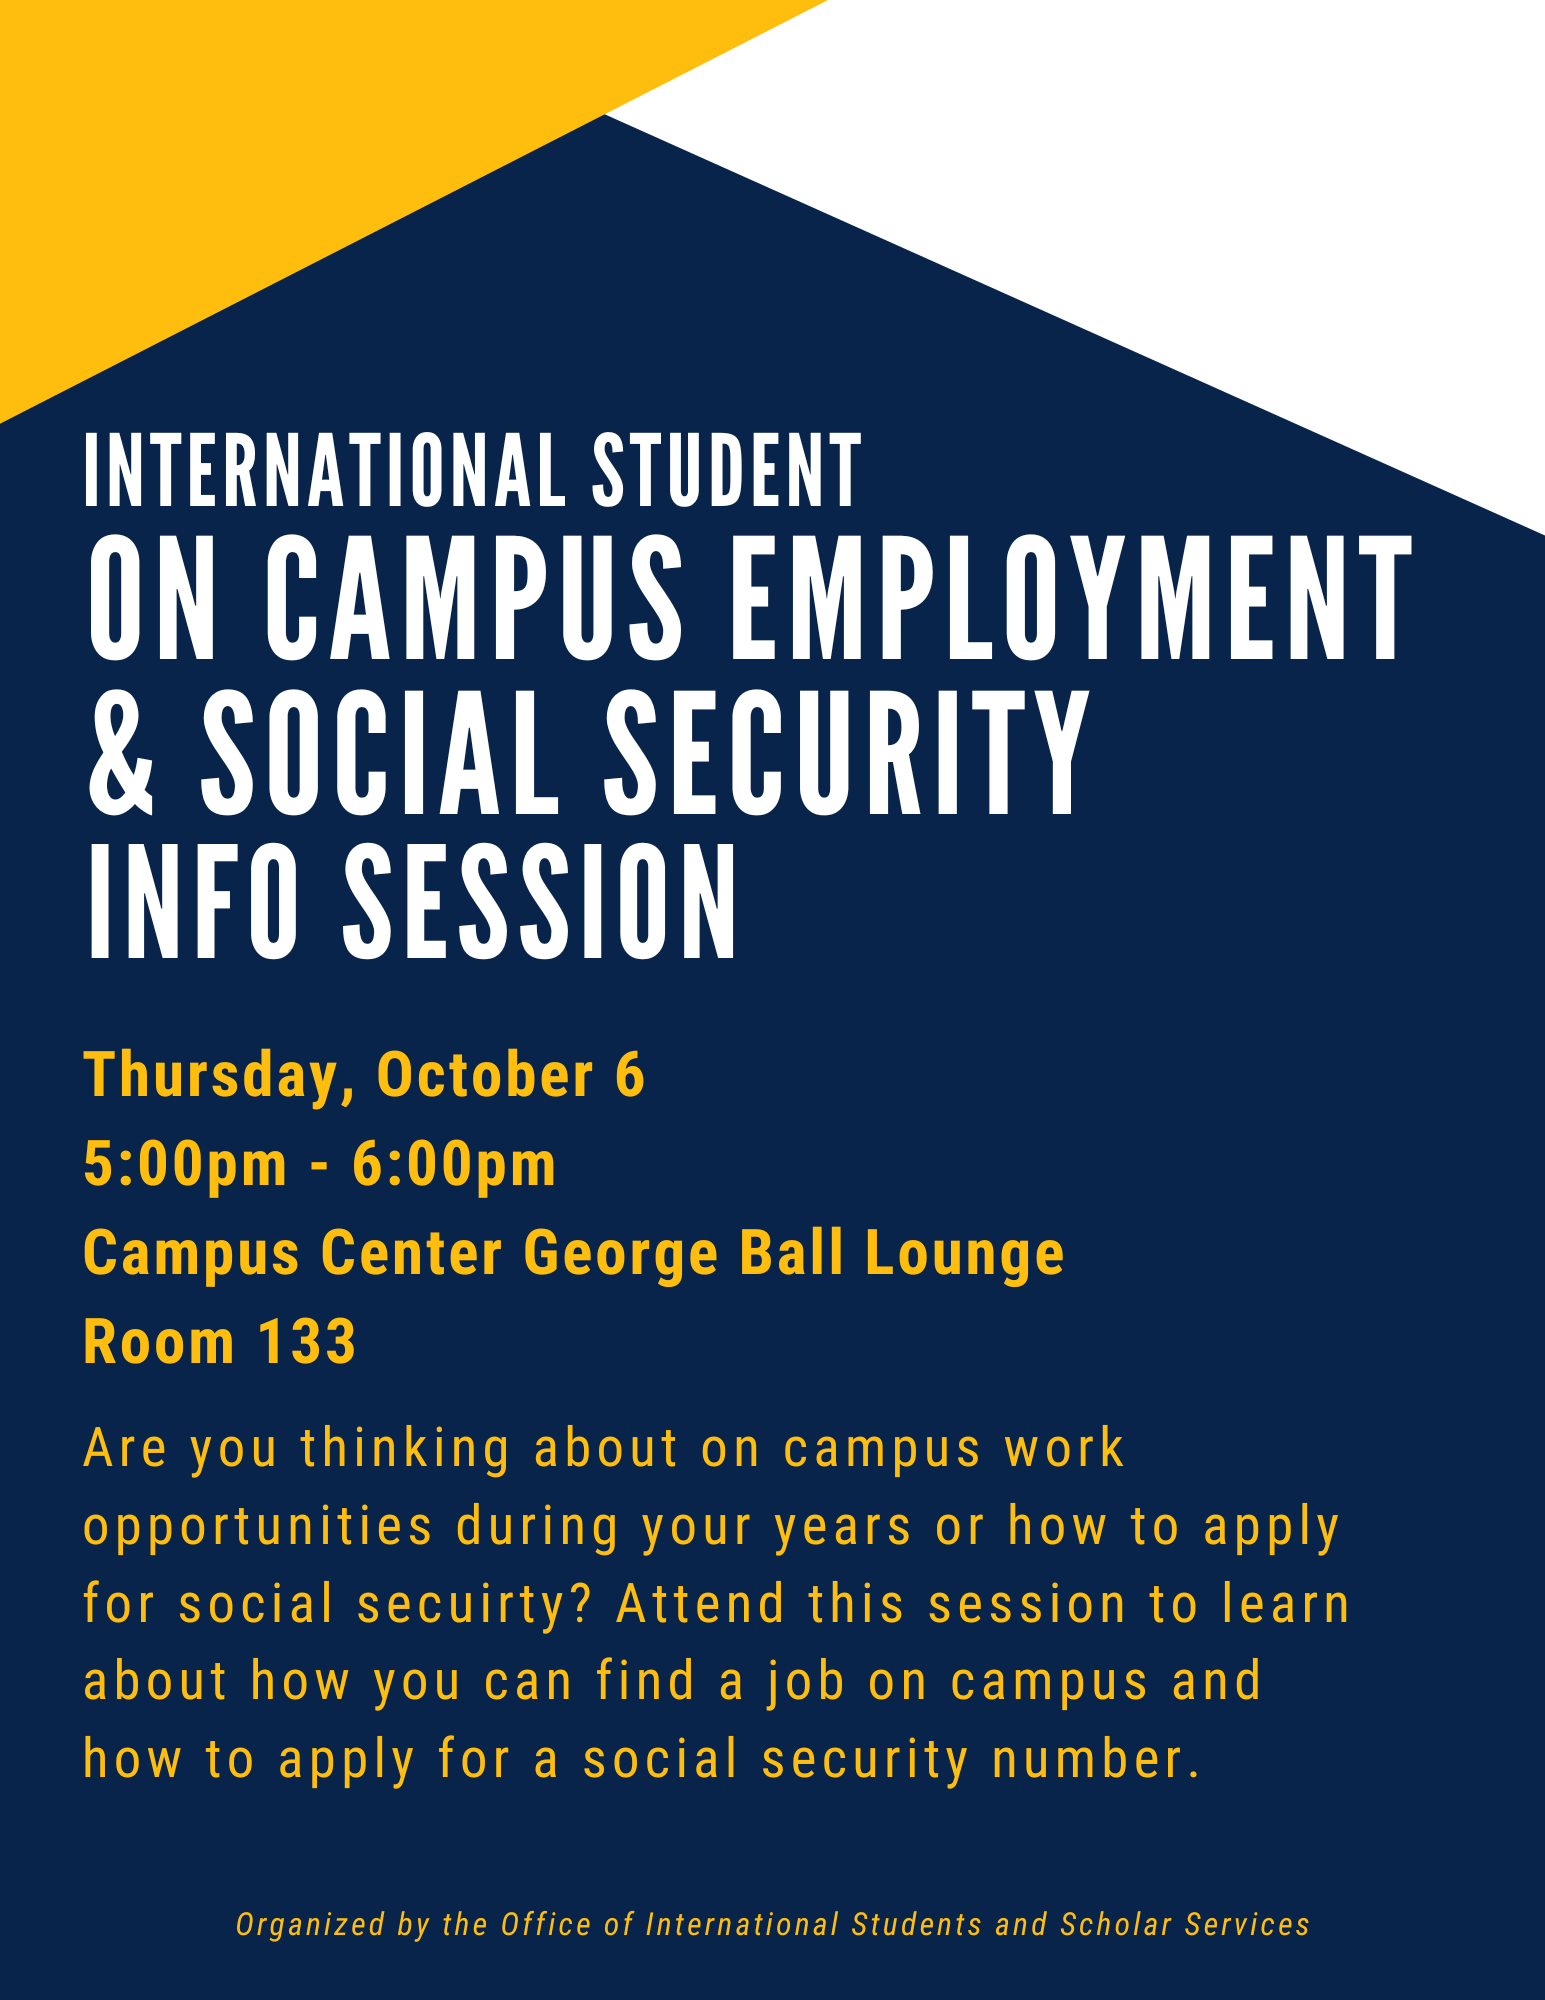 On-Campus Employment and Social Security Application Process for International Students